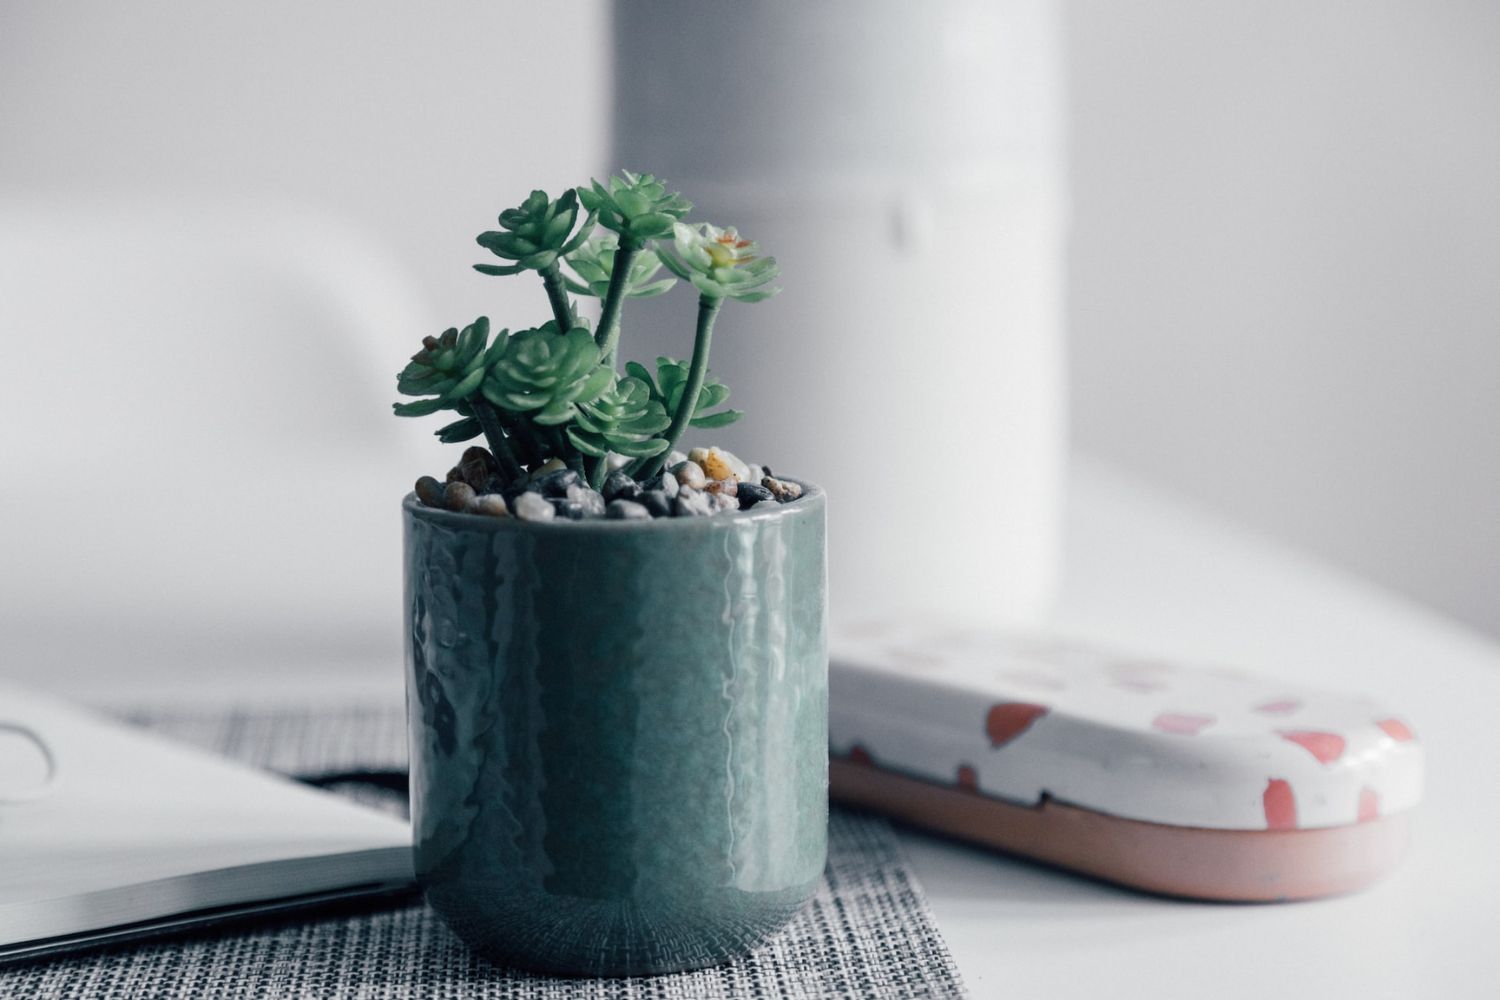 photo of a little plant on the desk by Nicolas J Leclercq on Unsplash